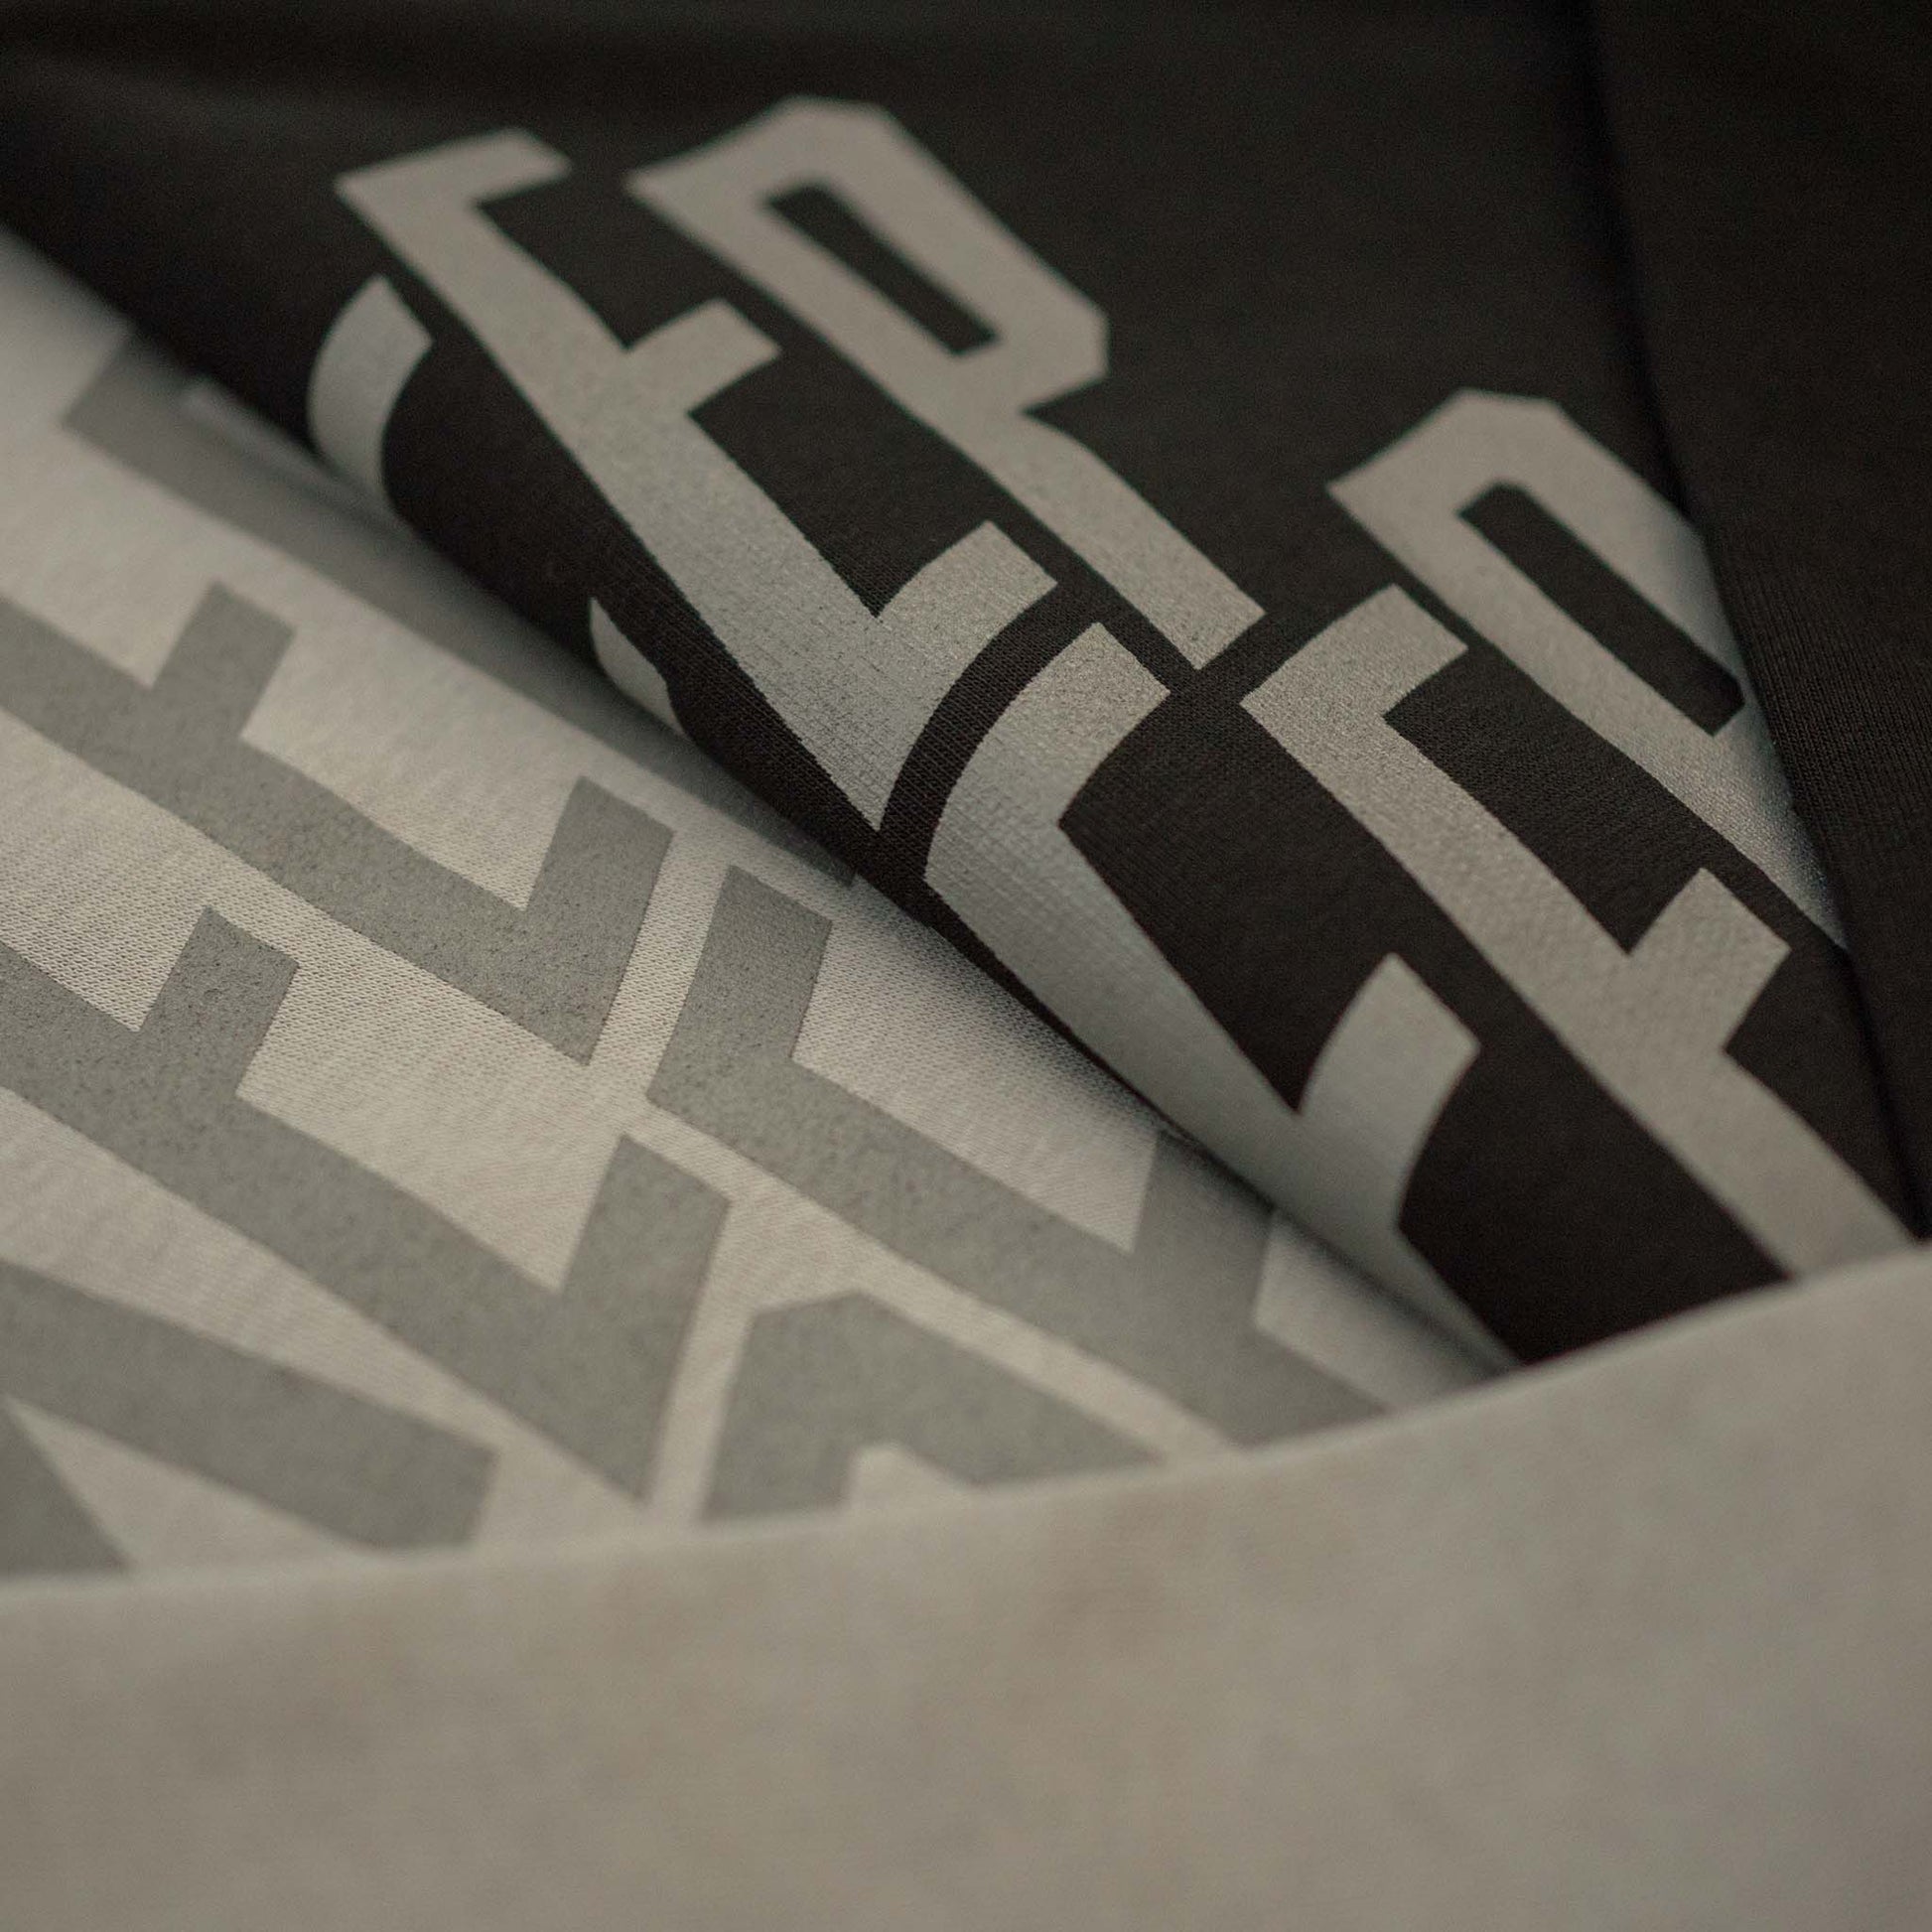 Keep Deep Opal Grey and Black Sweatshirt details with Silver Grey graphics